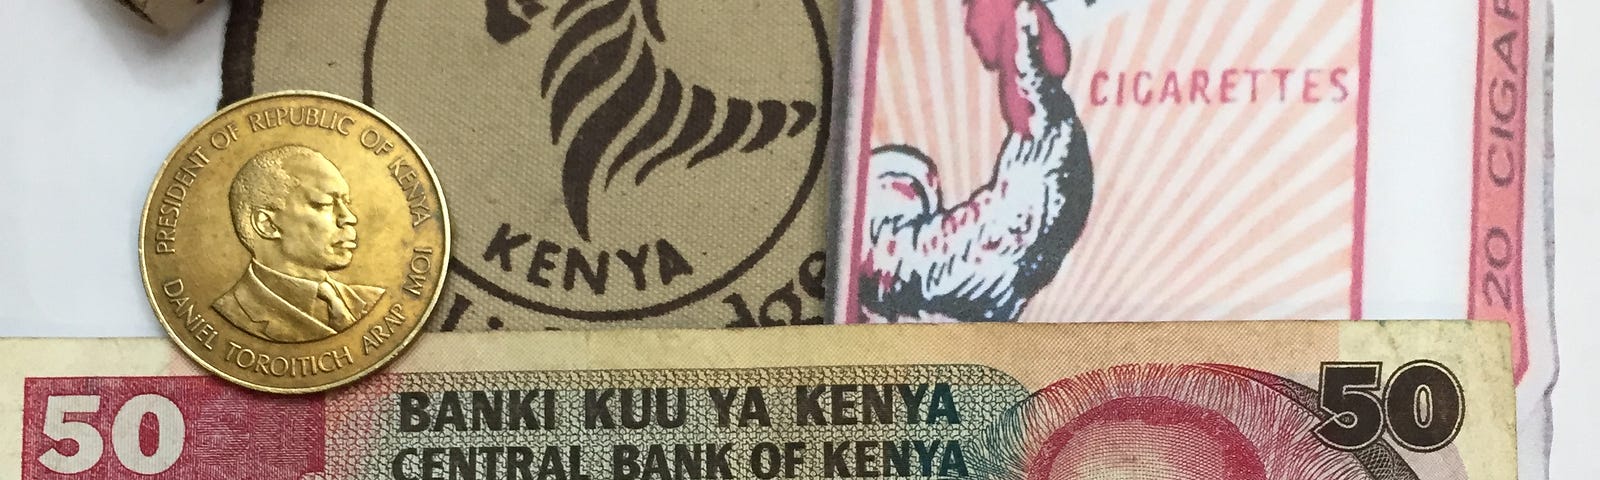 cigarettes, paper money, and a coin from Kenya